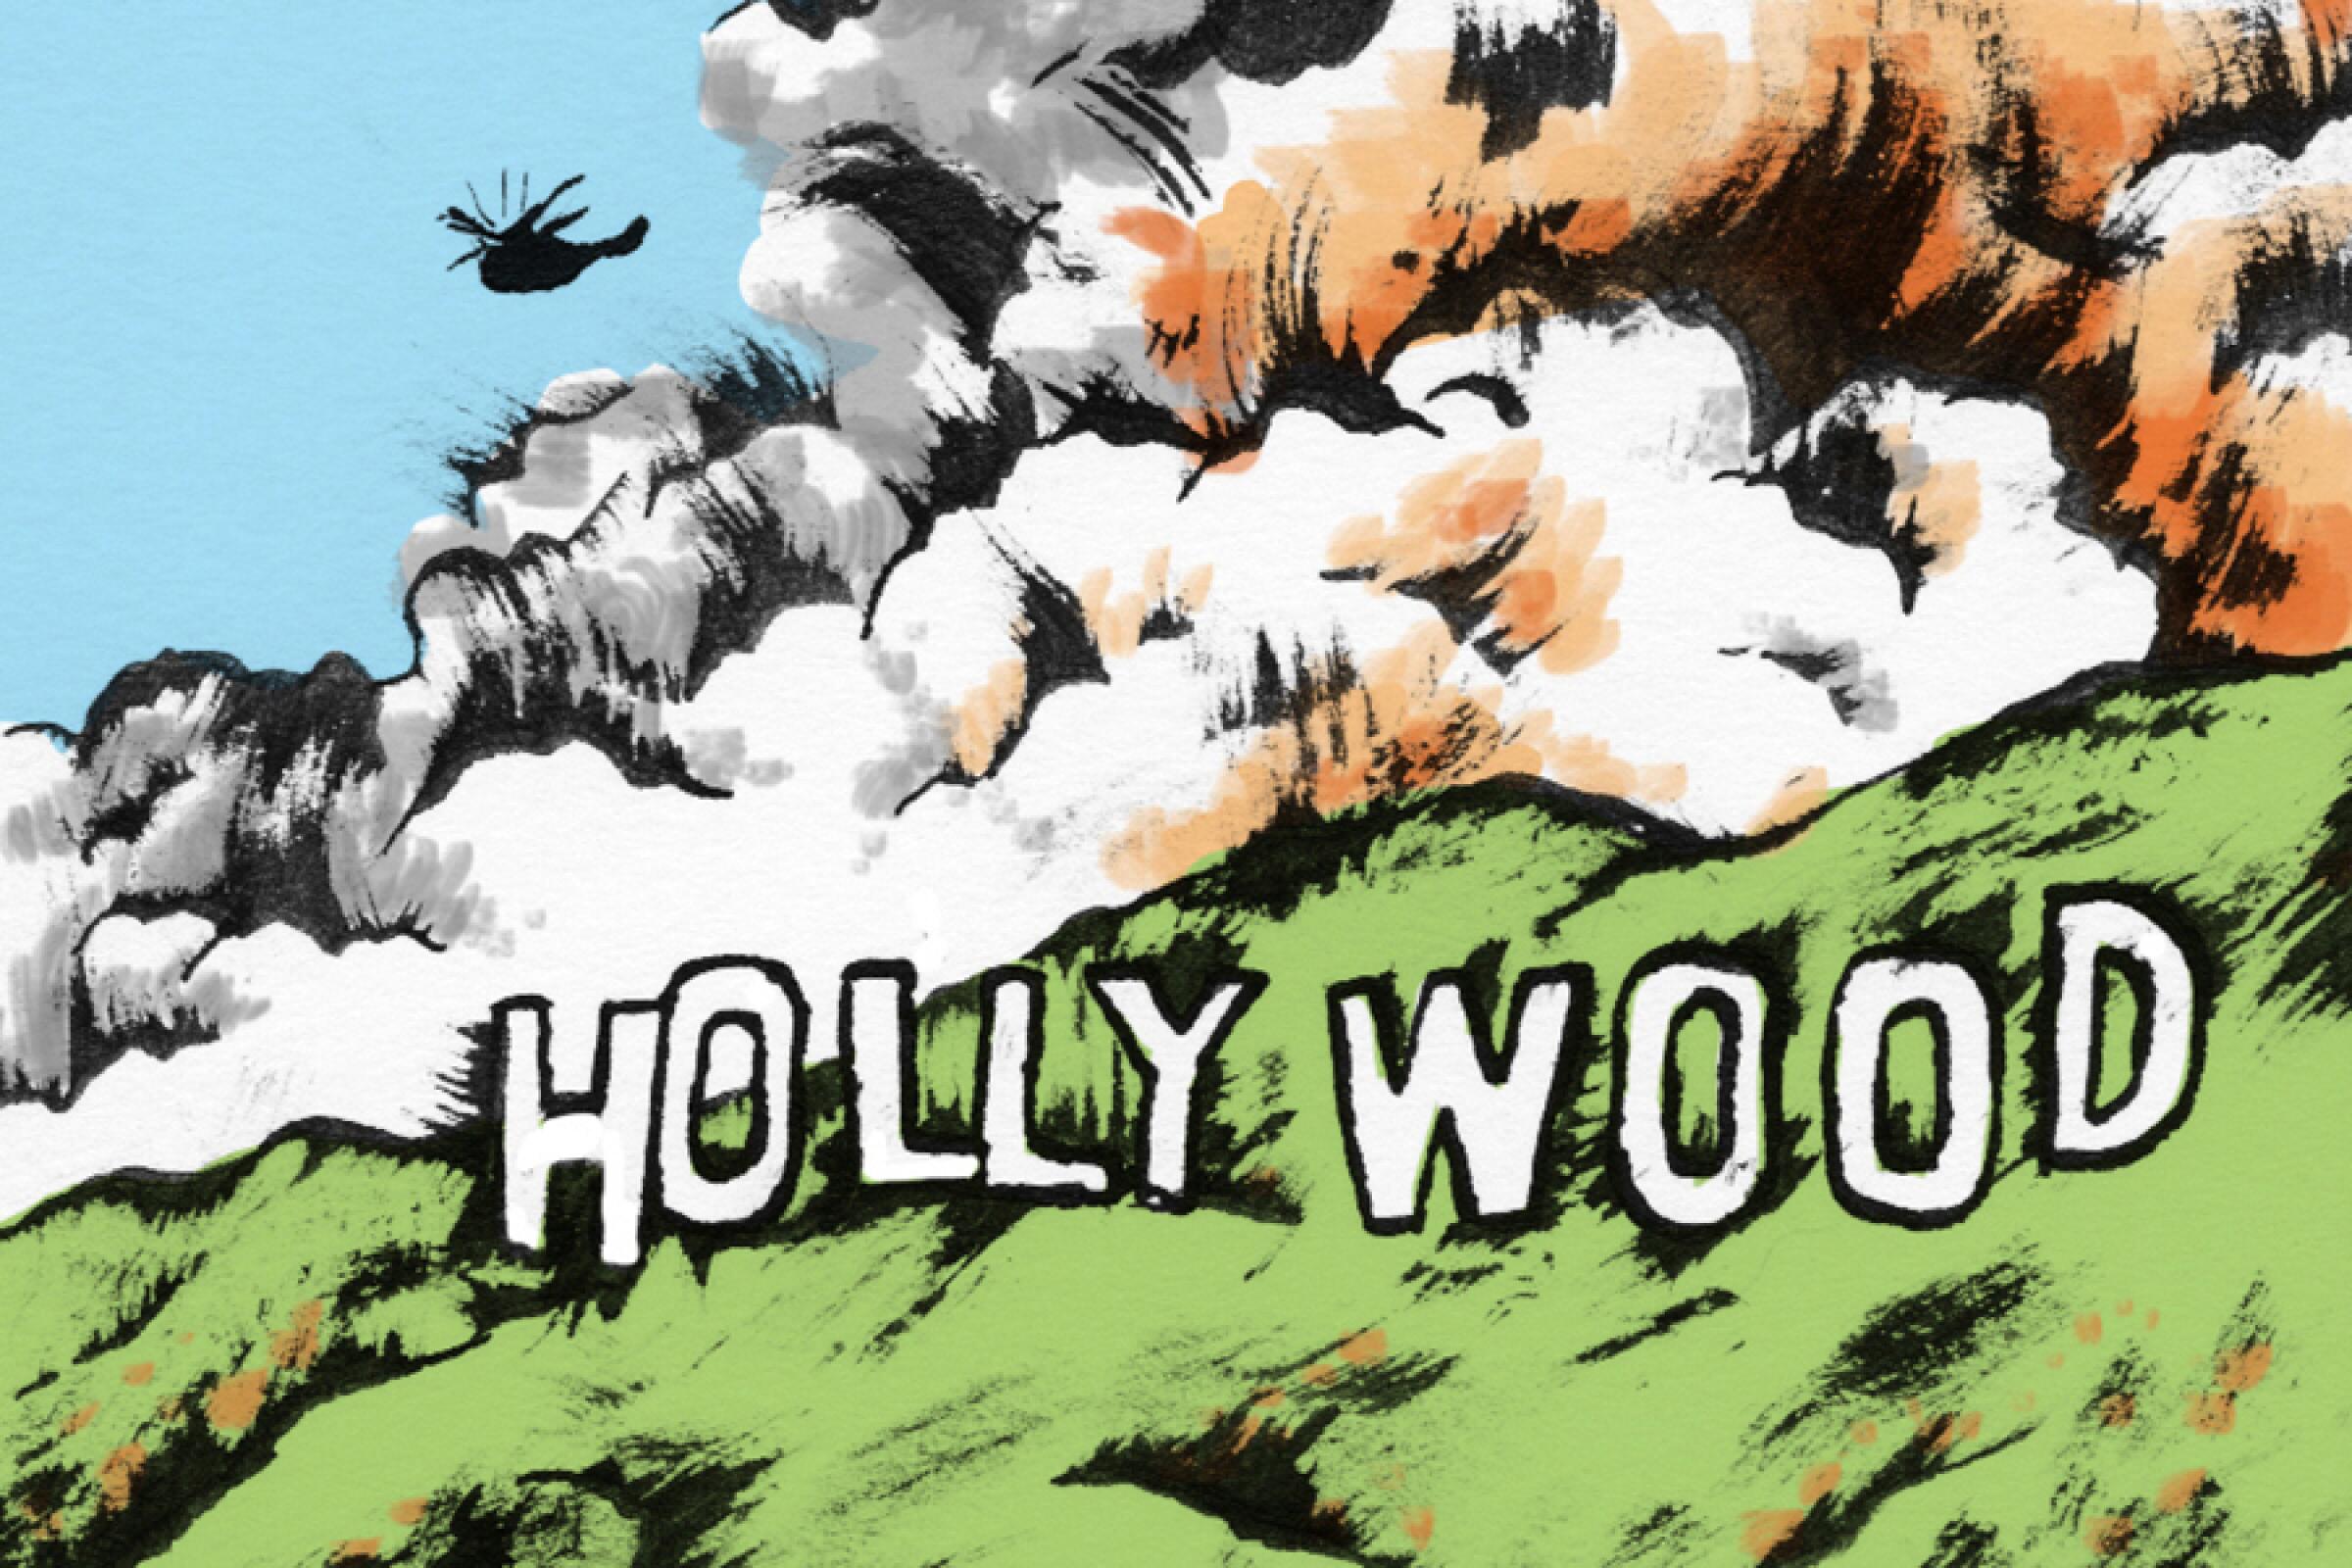 An illustration of the hill with the Hollywood sign on fire with a helicopter above